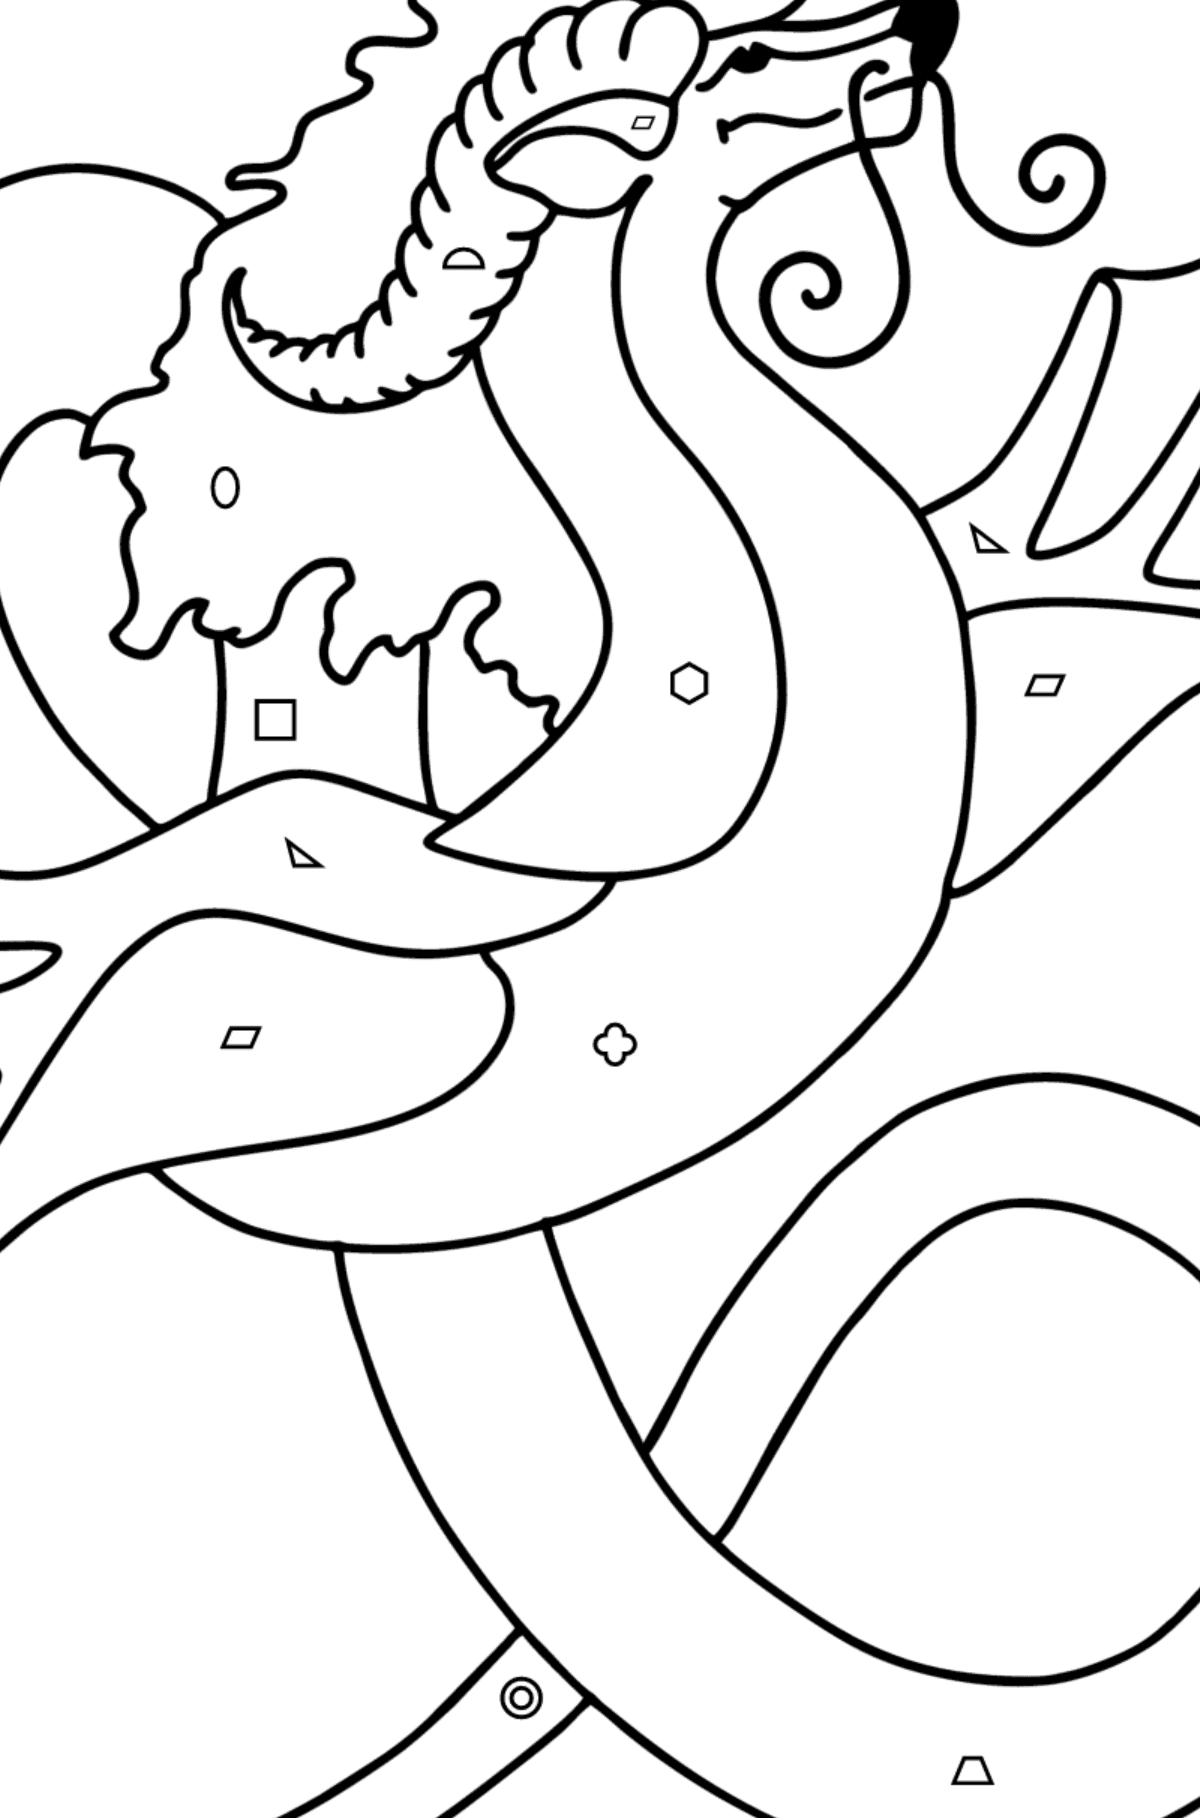 Flying Dragon coloring page - Coloring by Geometric Shapes for Kids